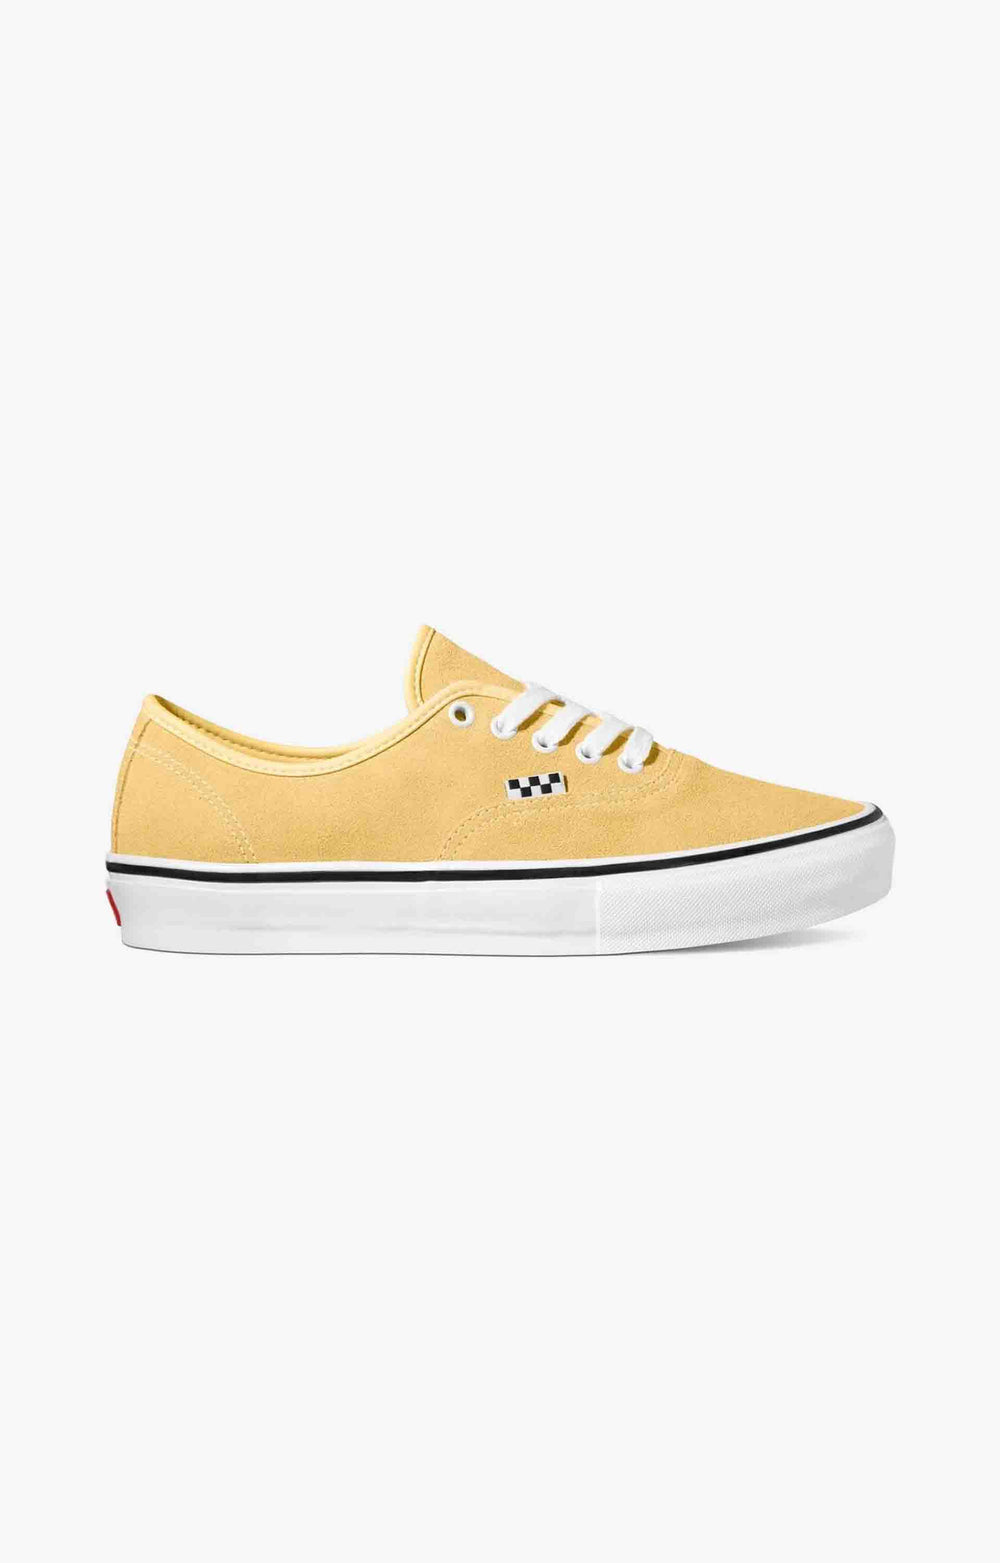 Vans Skate Authentic Shoes, Yellow